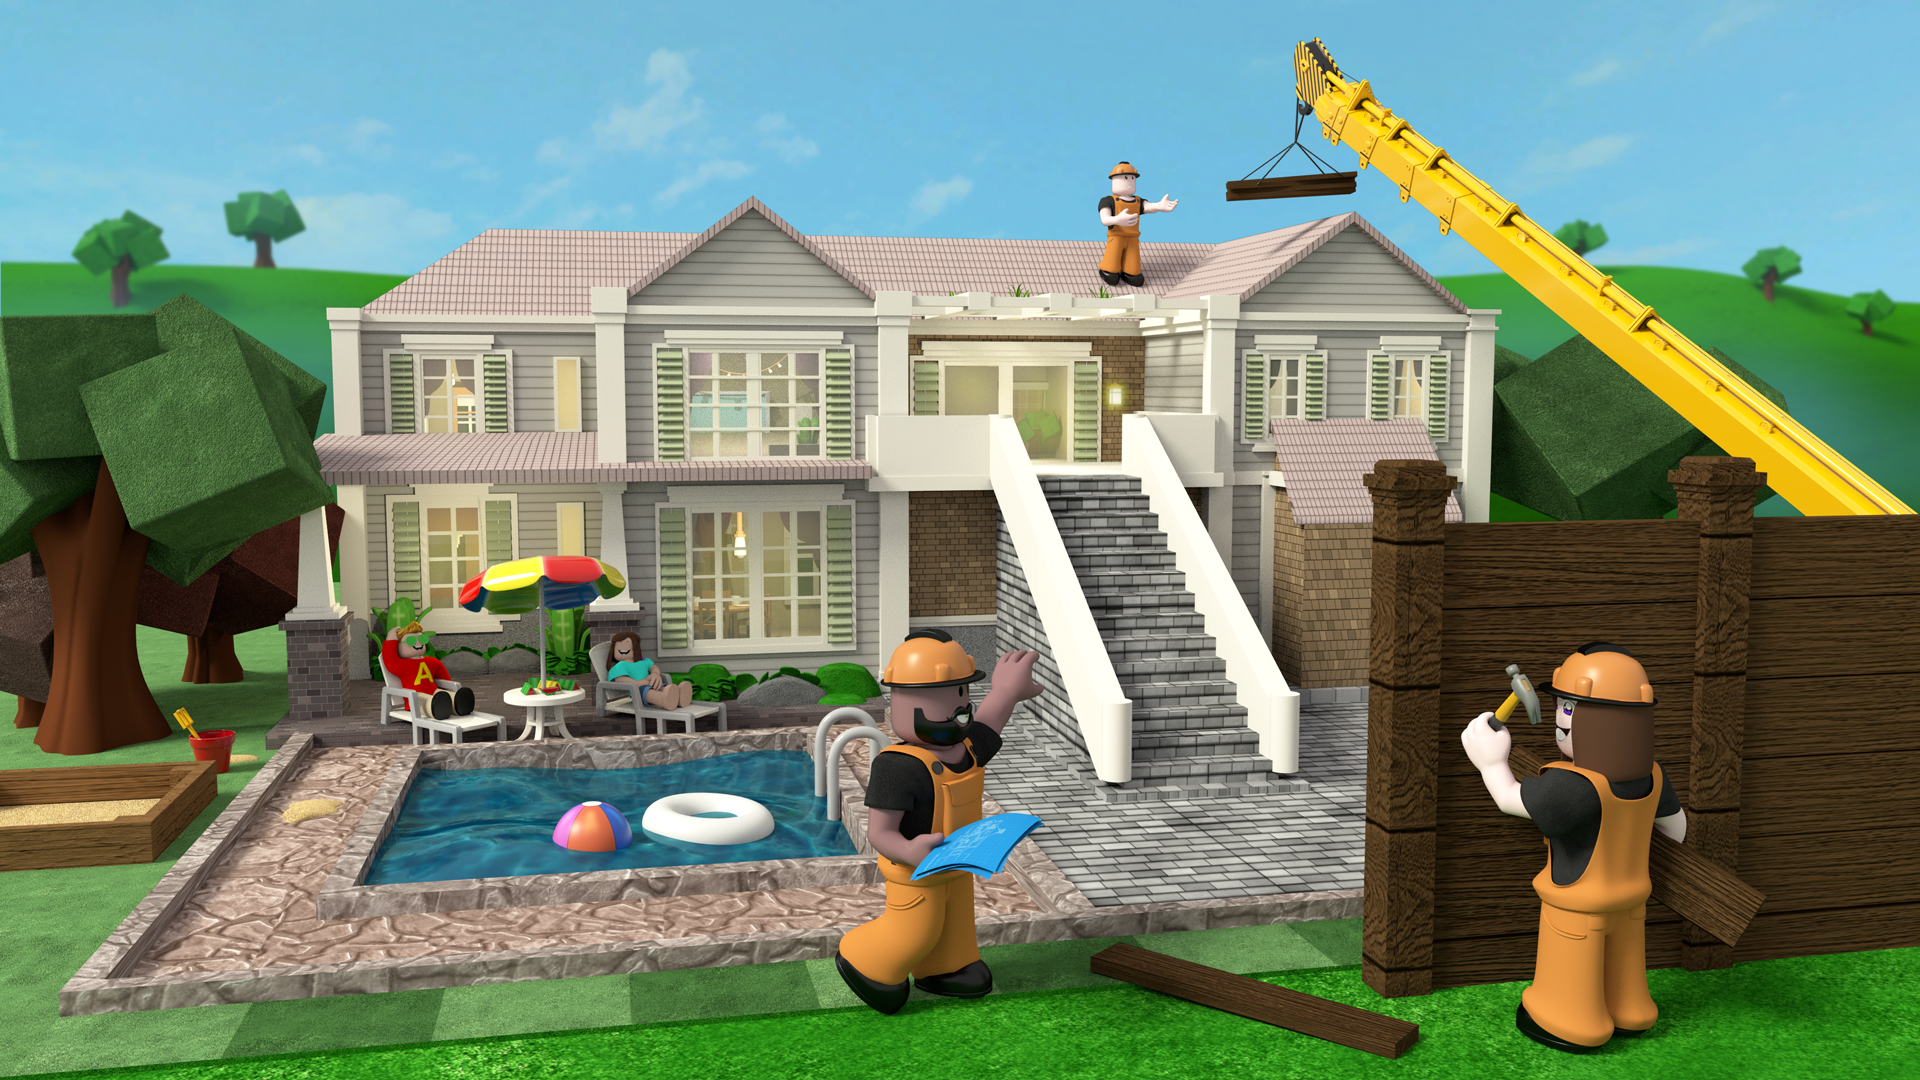 Download Play Roblox Bloxburg and build the home of your dreams Wallpaper   Wallpaperscom